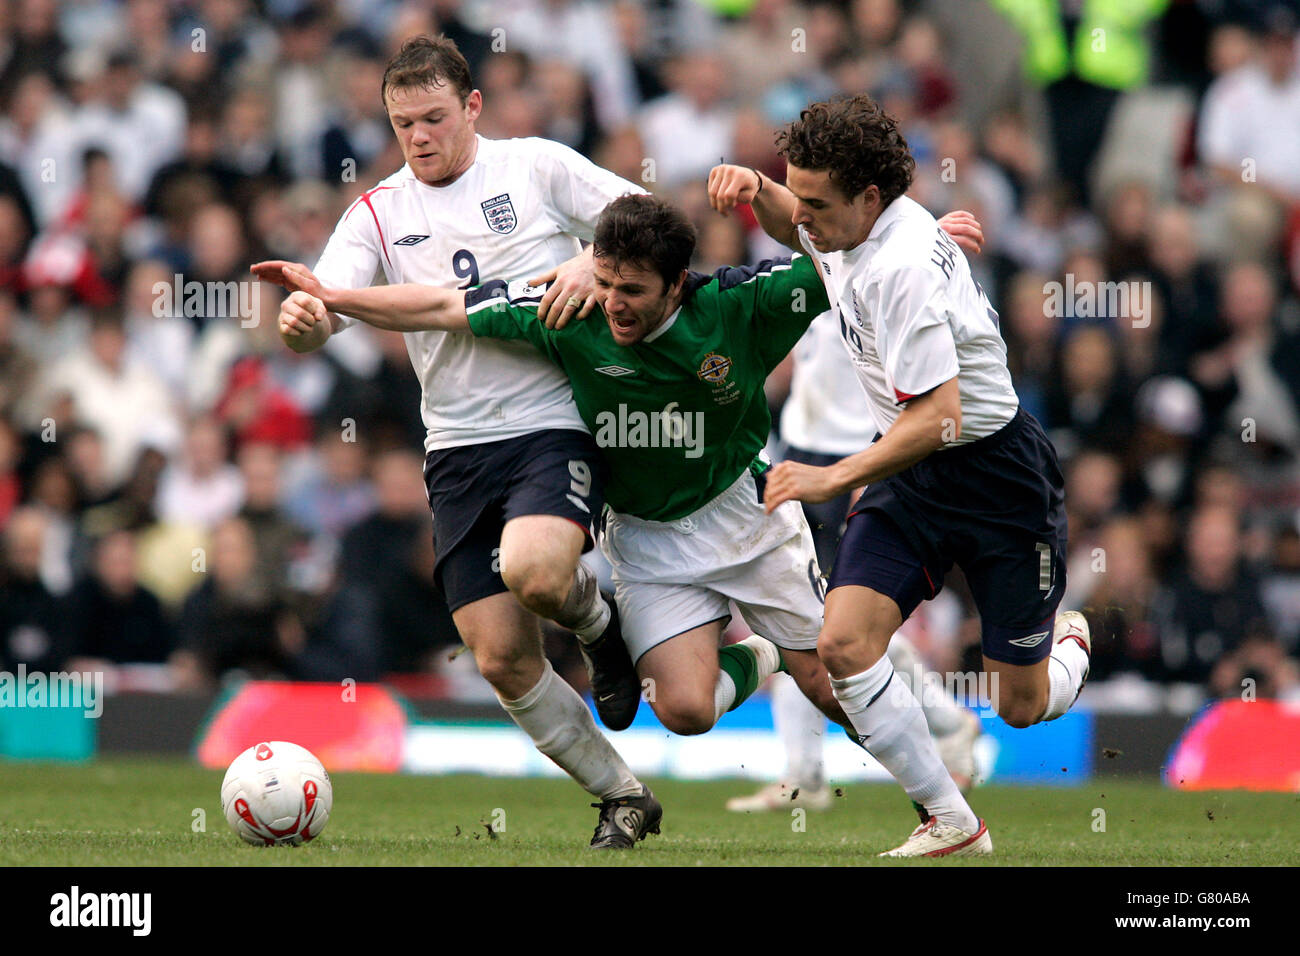 Soccer - FIFA World Cup 2006 Qualifier - Group Six - England v Northern Ireland - Old Trafford. England's Wayne Rooney (L) and Owen Hargreaves (R) battle for the ball with Northern Ireland's Damien Johnson. Stock Photo